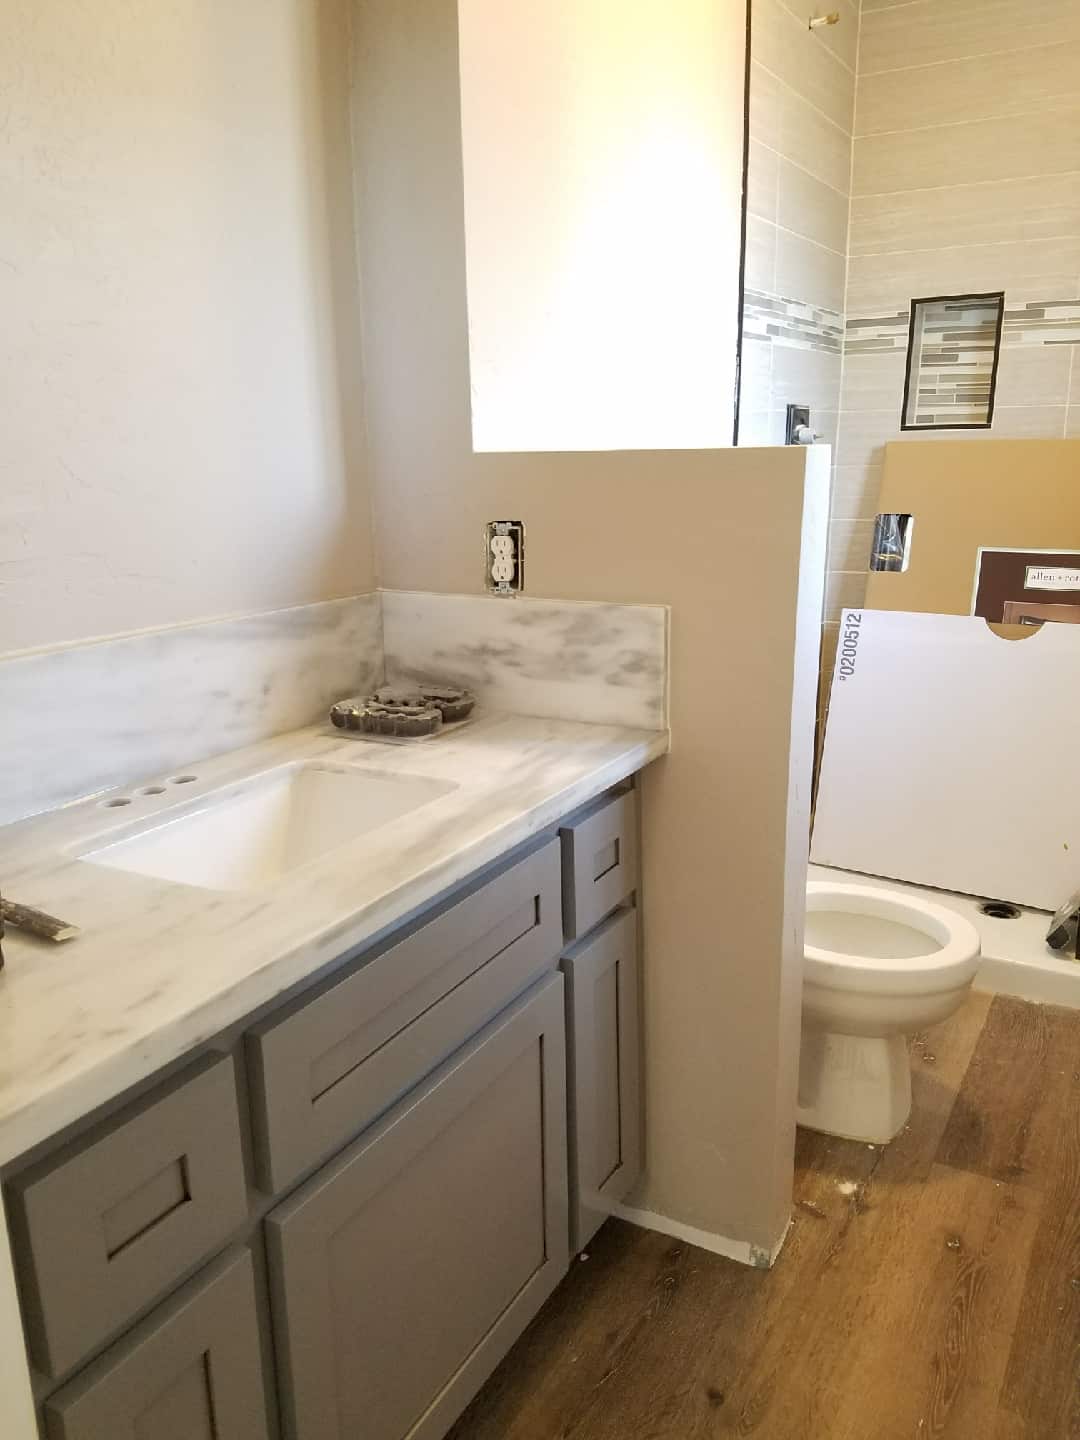 Remodeling a bathroom with a dividing wall to create privacy